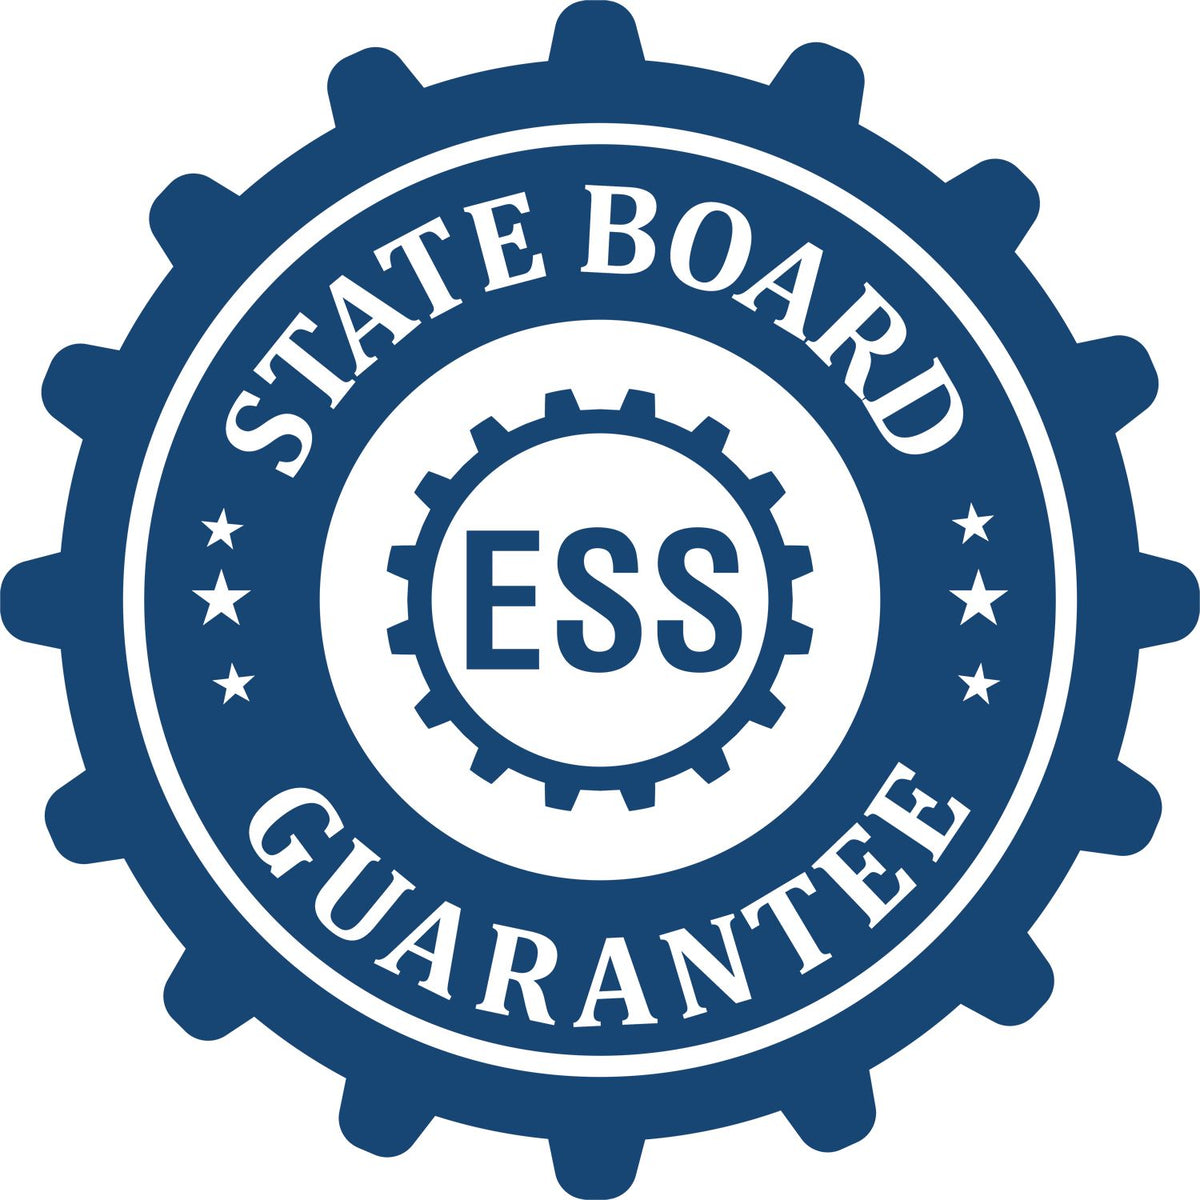 An emblem in a gear shape illustrating a state board guarantee for the State of Washington Extended Long Reach Engineer Seal product.